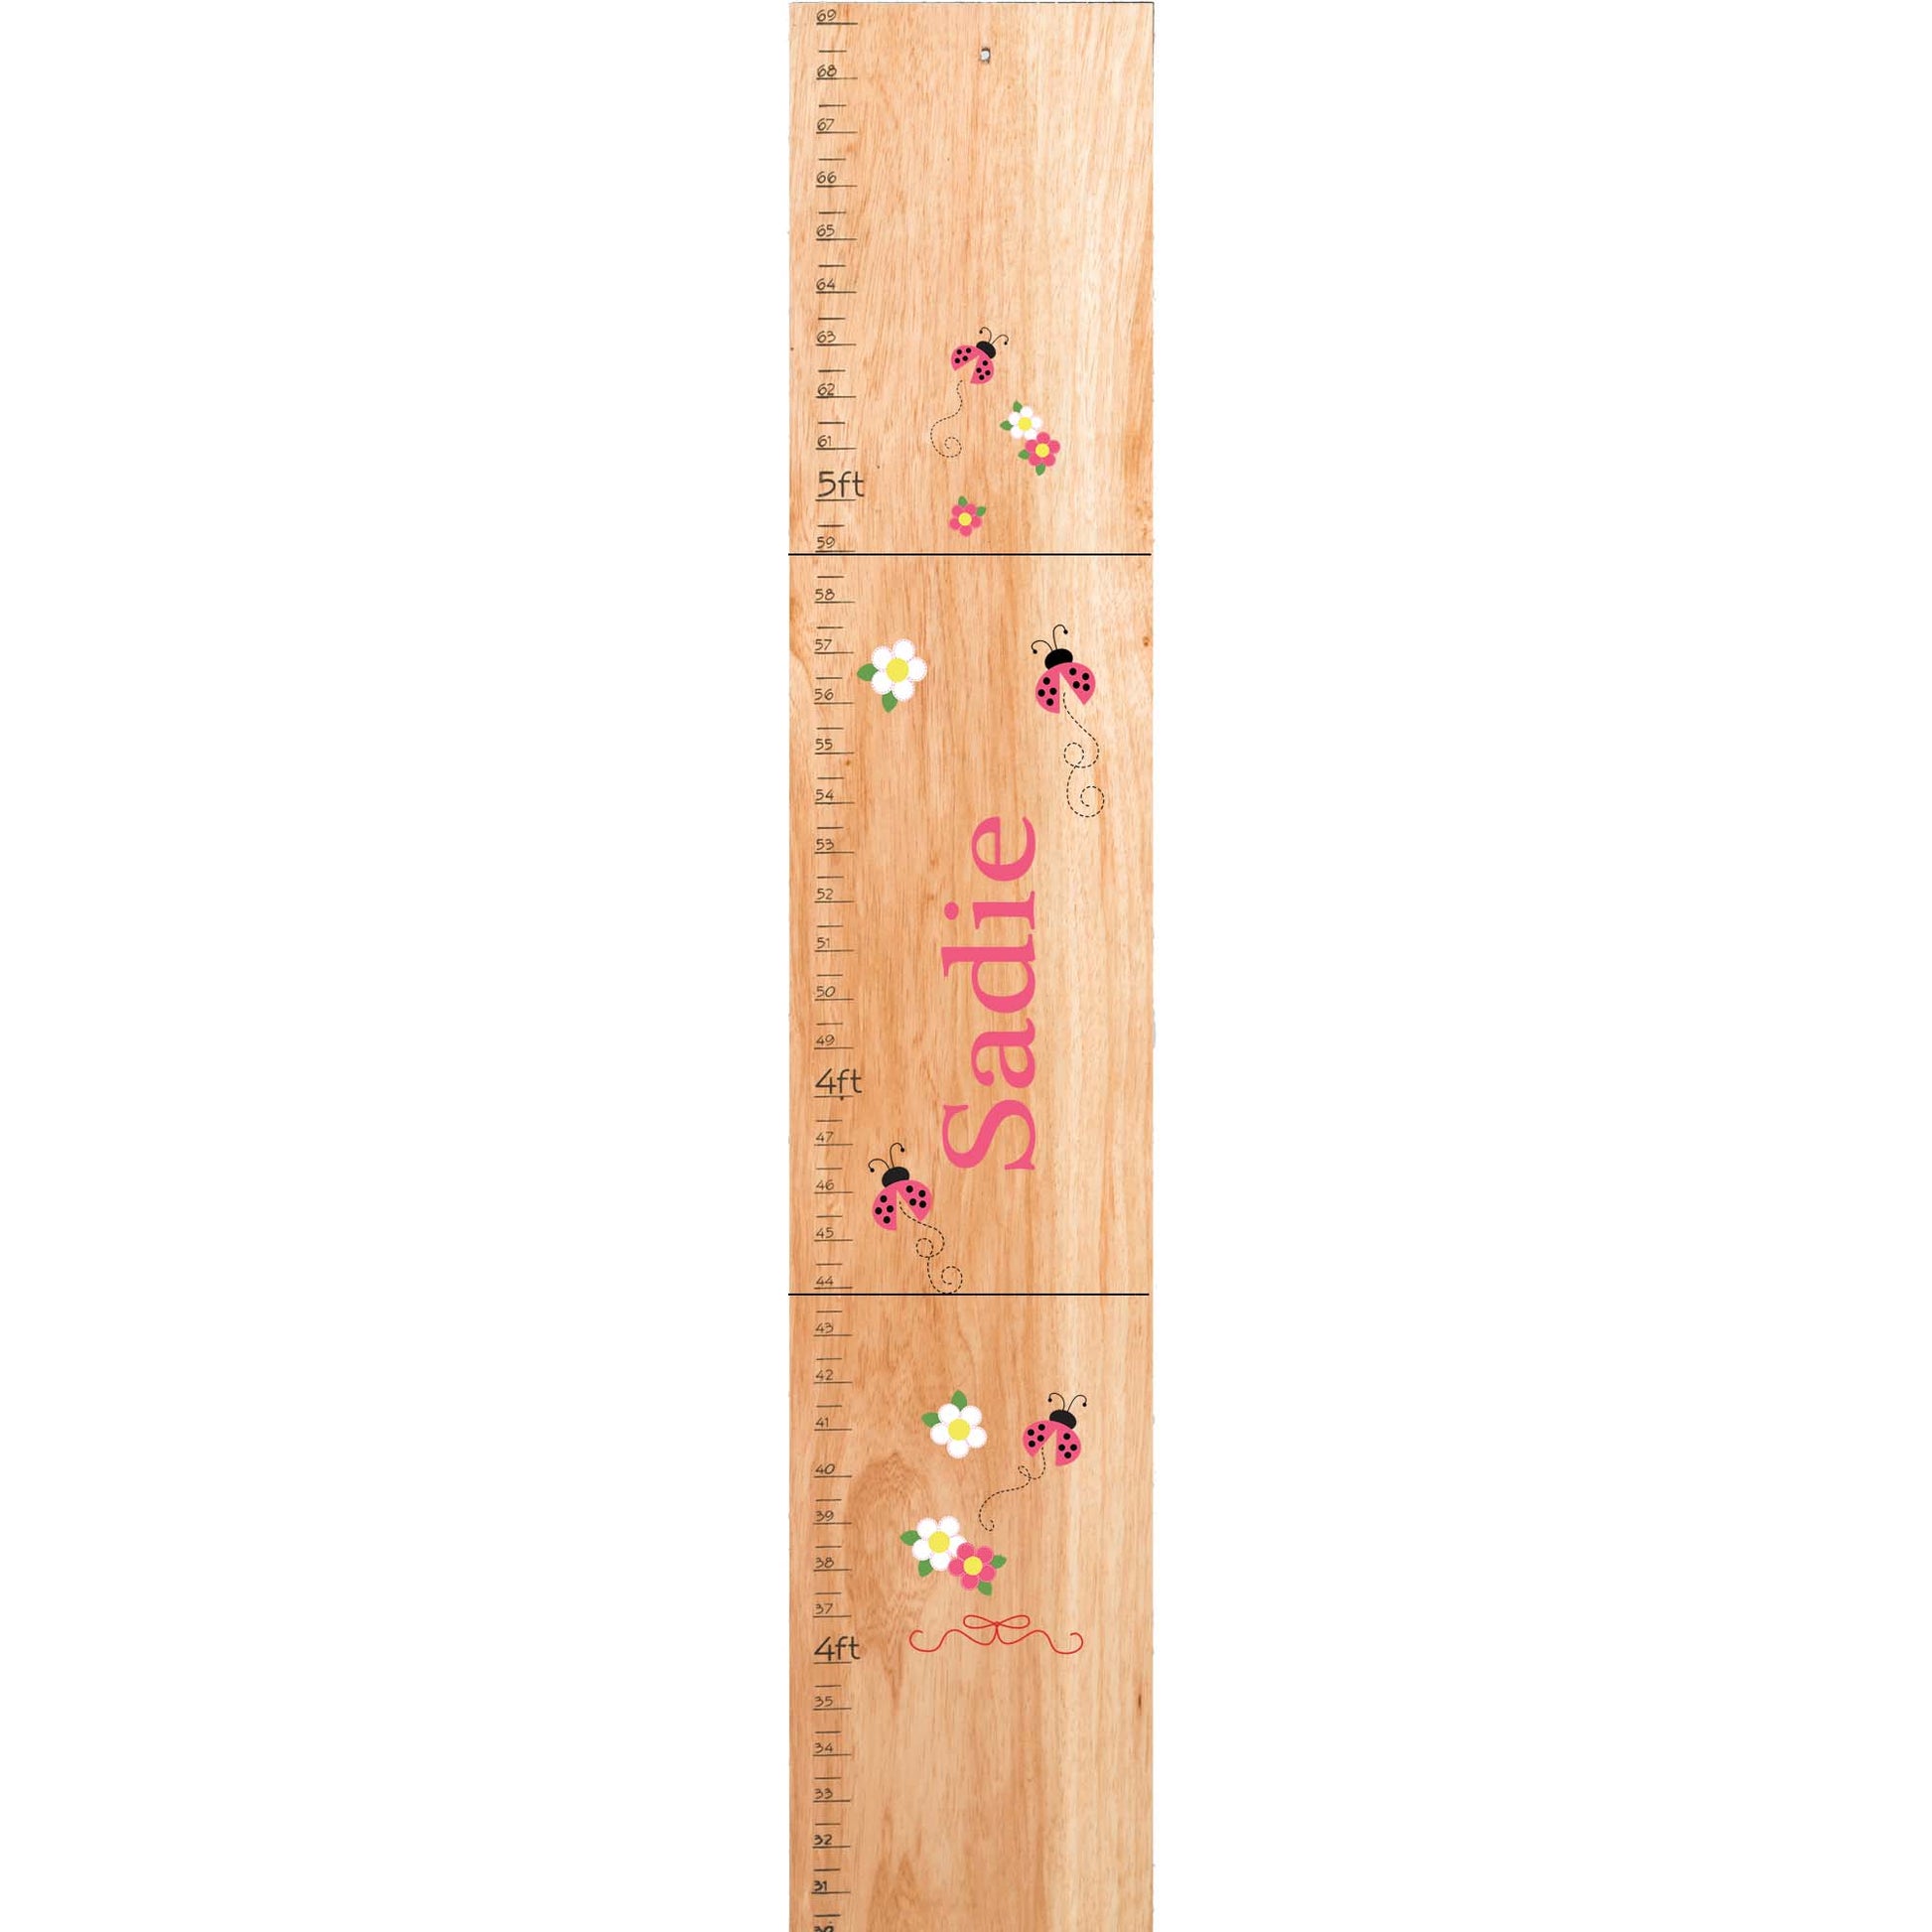 Personalized Natural Growth Chart With Red Ladybug Design